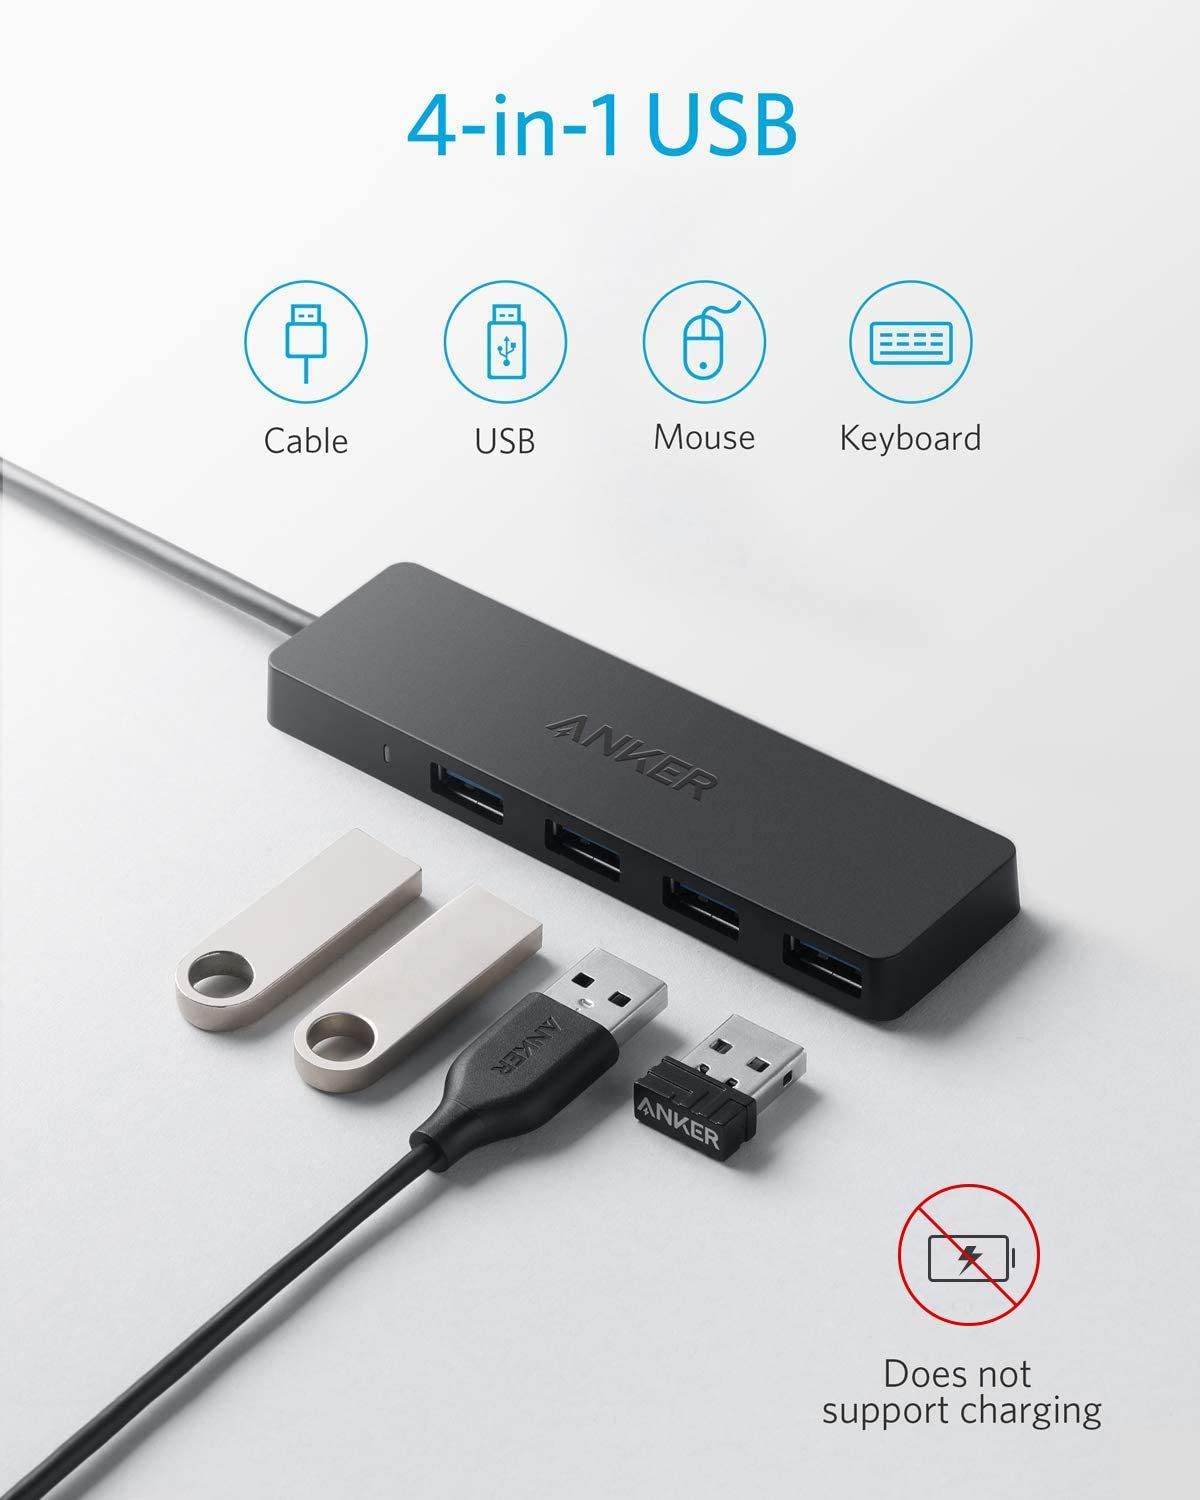 Anker 4-Port USB 3.0 Hub features and compatibility